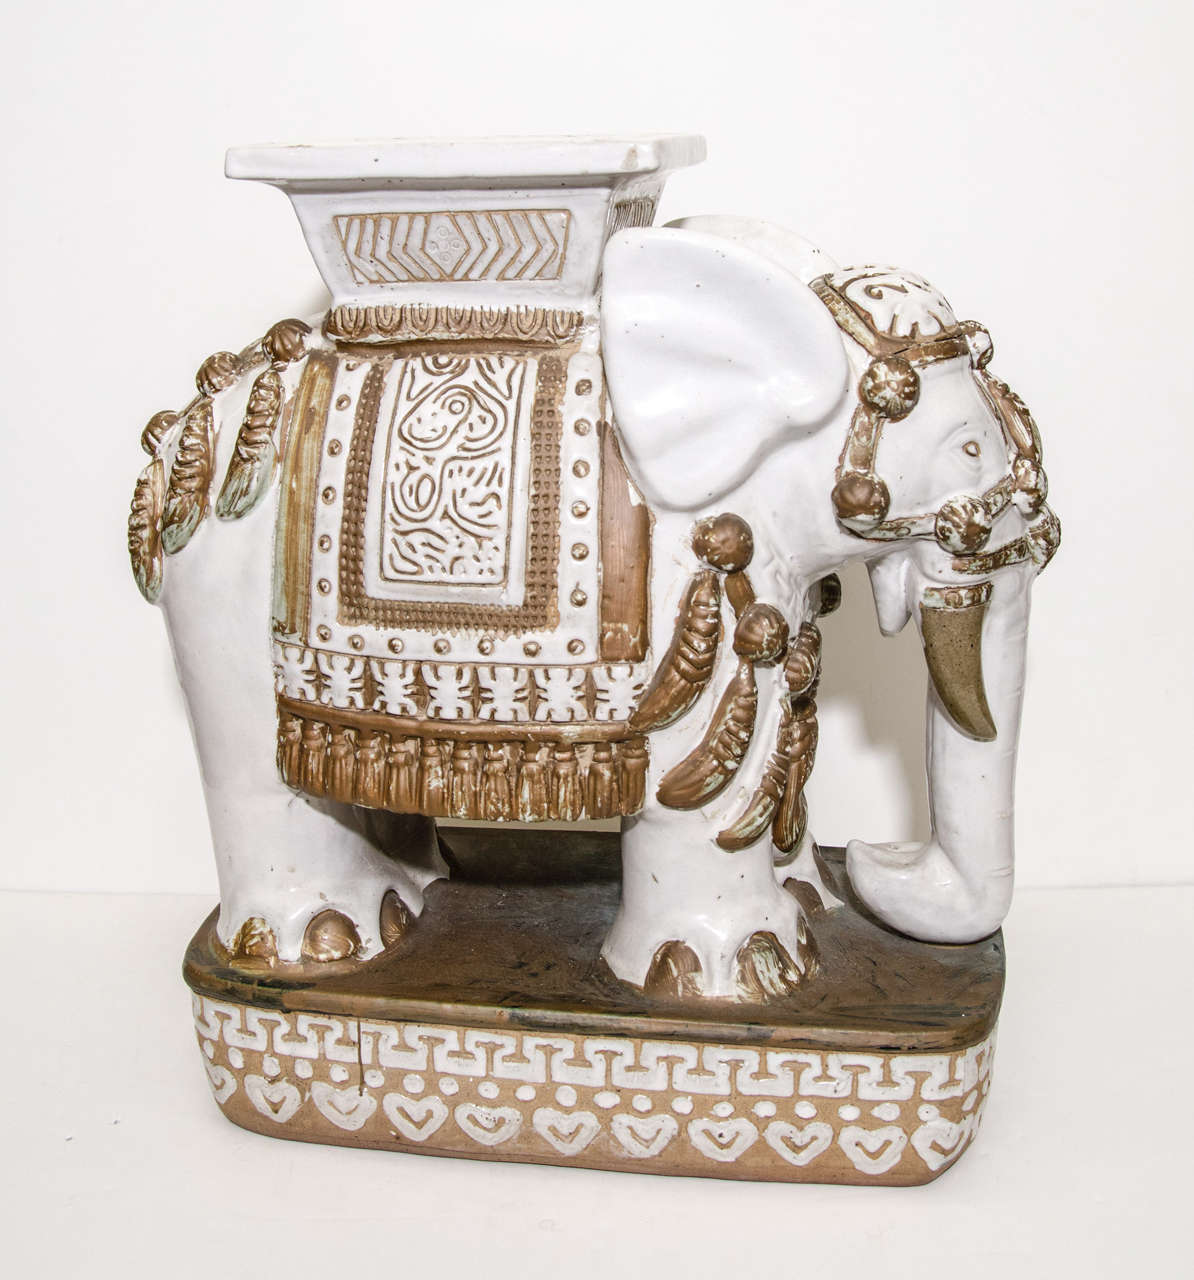 A vintage pair of highly decorative ceramic elephant stools or tables with painted gold detail. There is some wear to the gold paint.

Reduced from:  $2,450